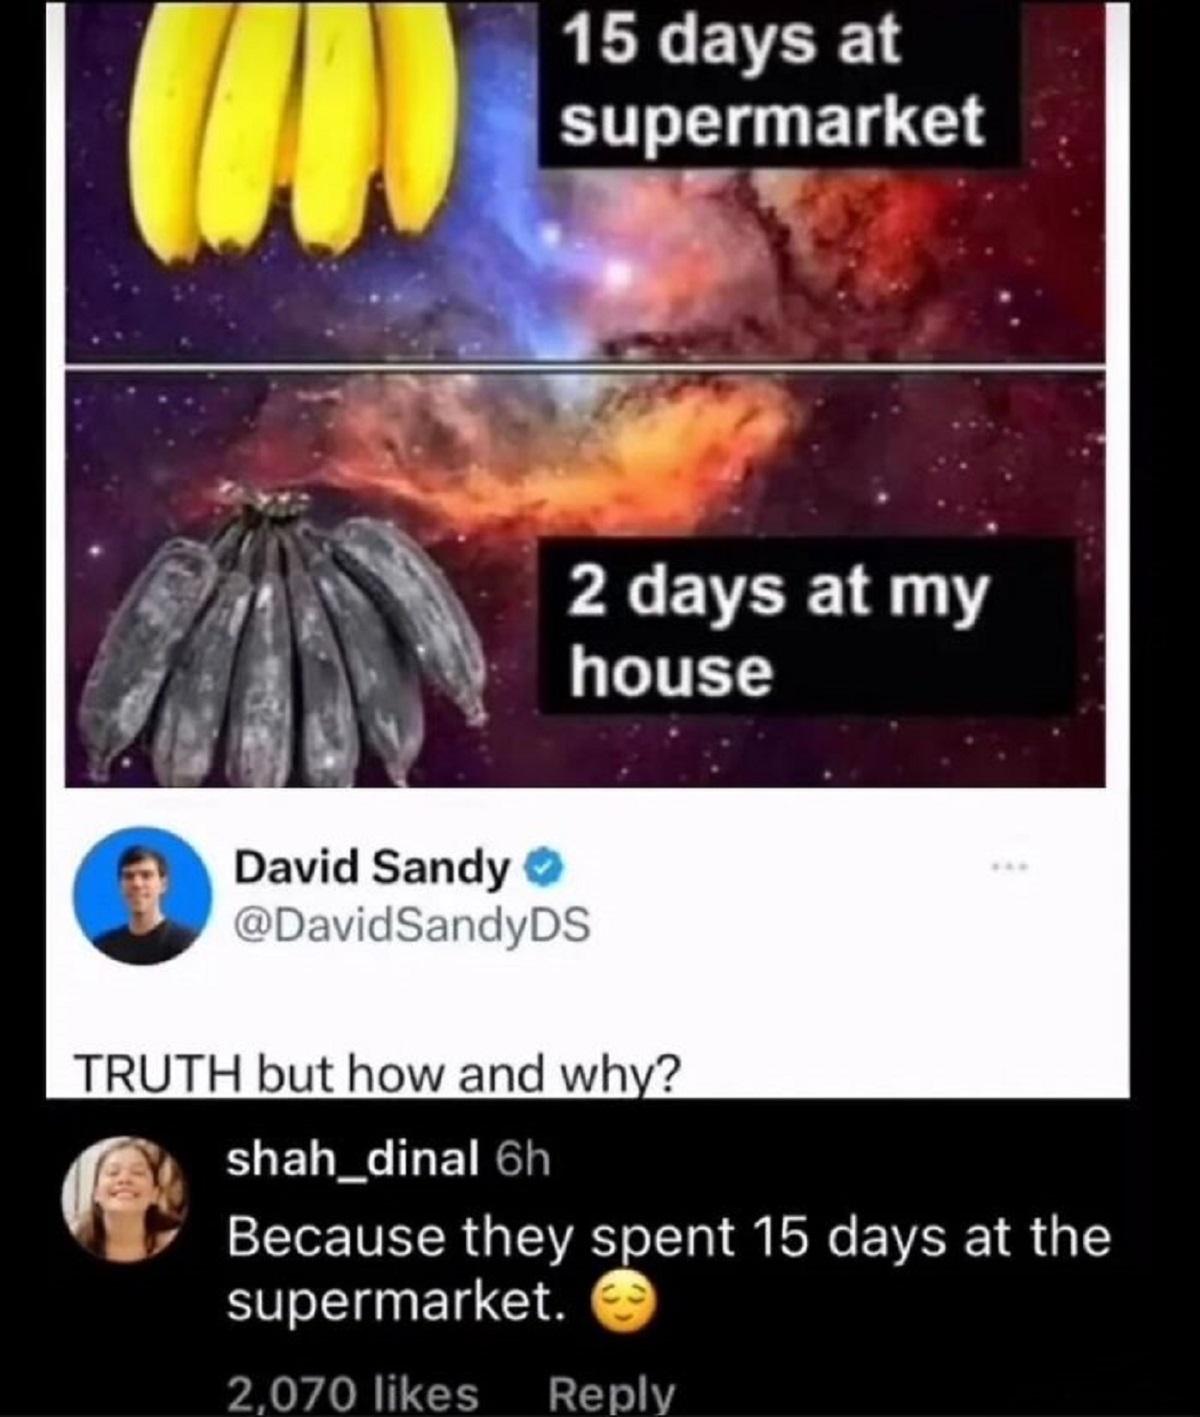 screenshot - an 15 days at supermarket 2 days at my house David Sandy Truth but how and why? shah_dinal 6h Because they spent 15 days at the supermarket. 2,070